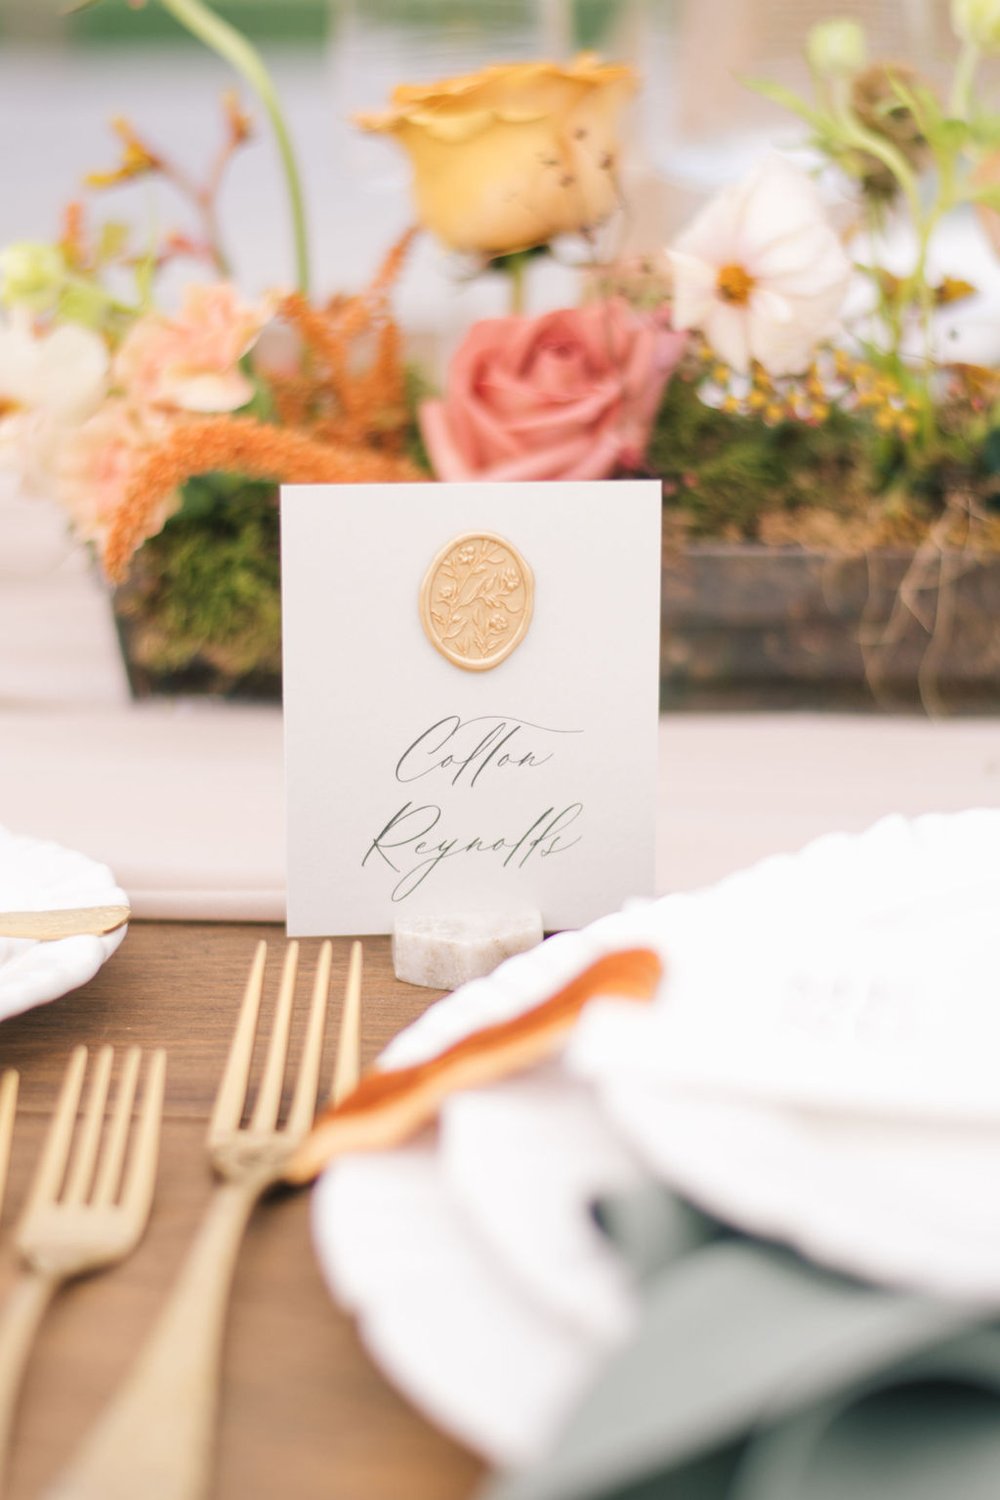 Custom place card with olive green napkin and gold floral cutlery from Simply Beautiful Decor.